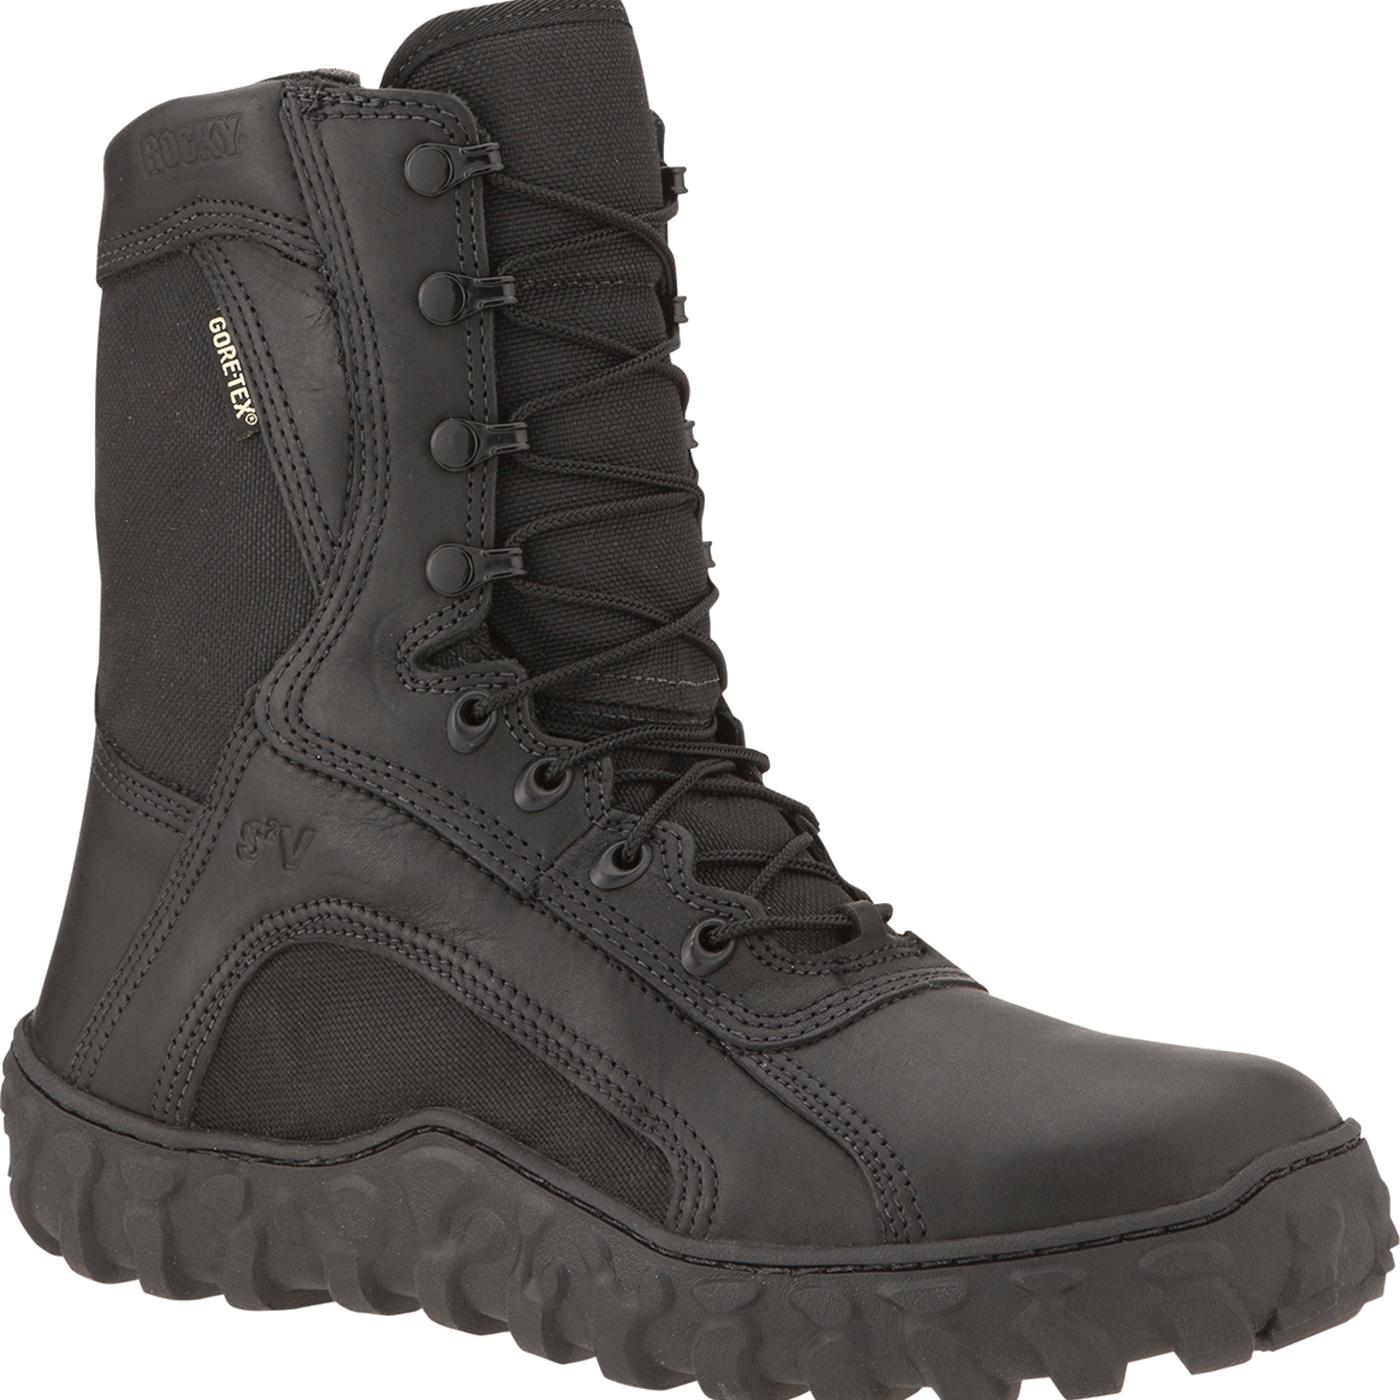 Rocky S2V GORE-TEX Waterproof Black Tactical Military Boot